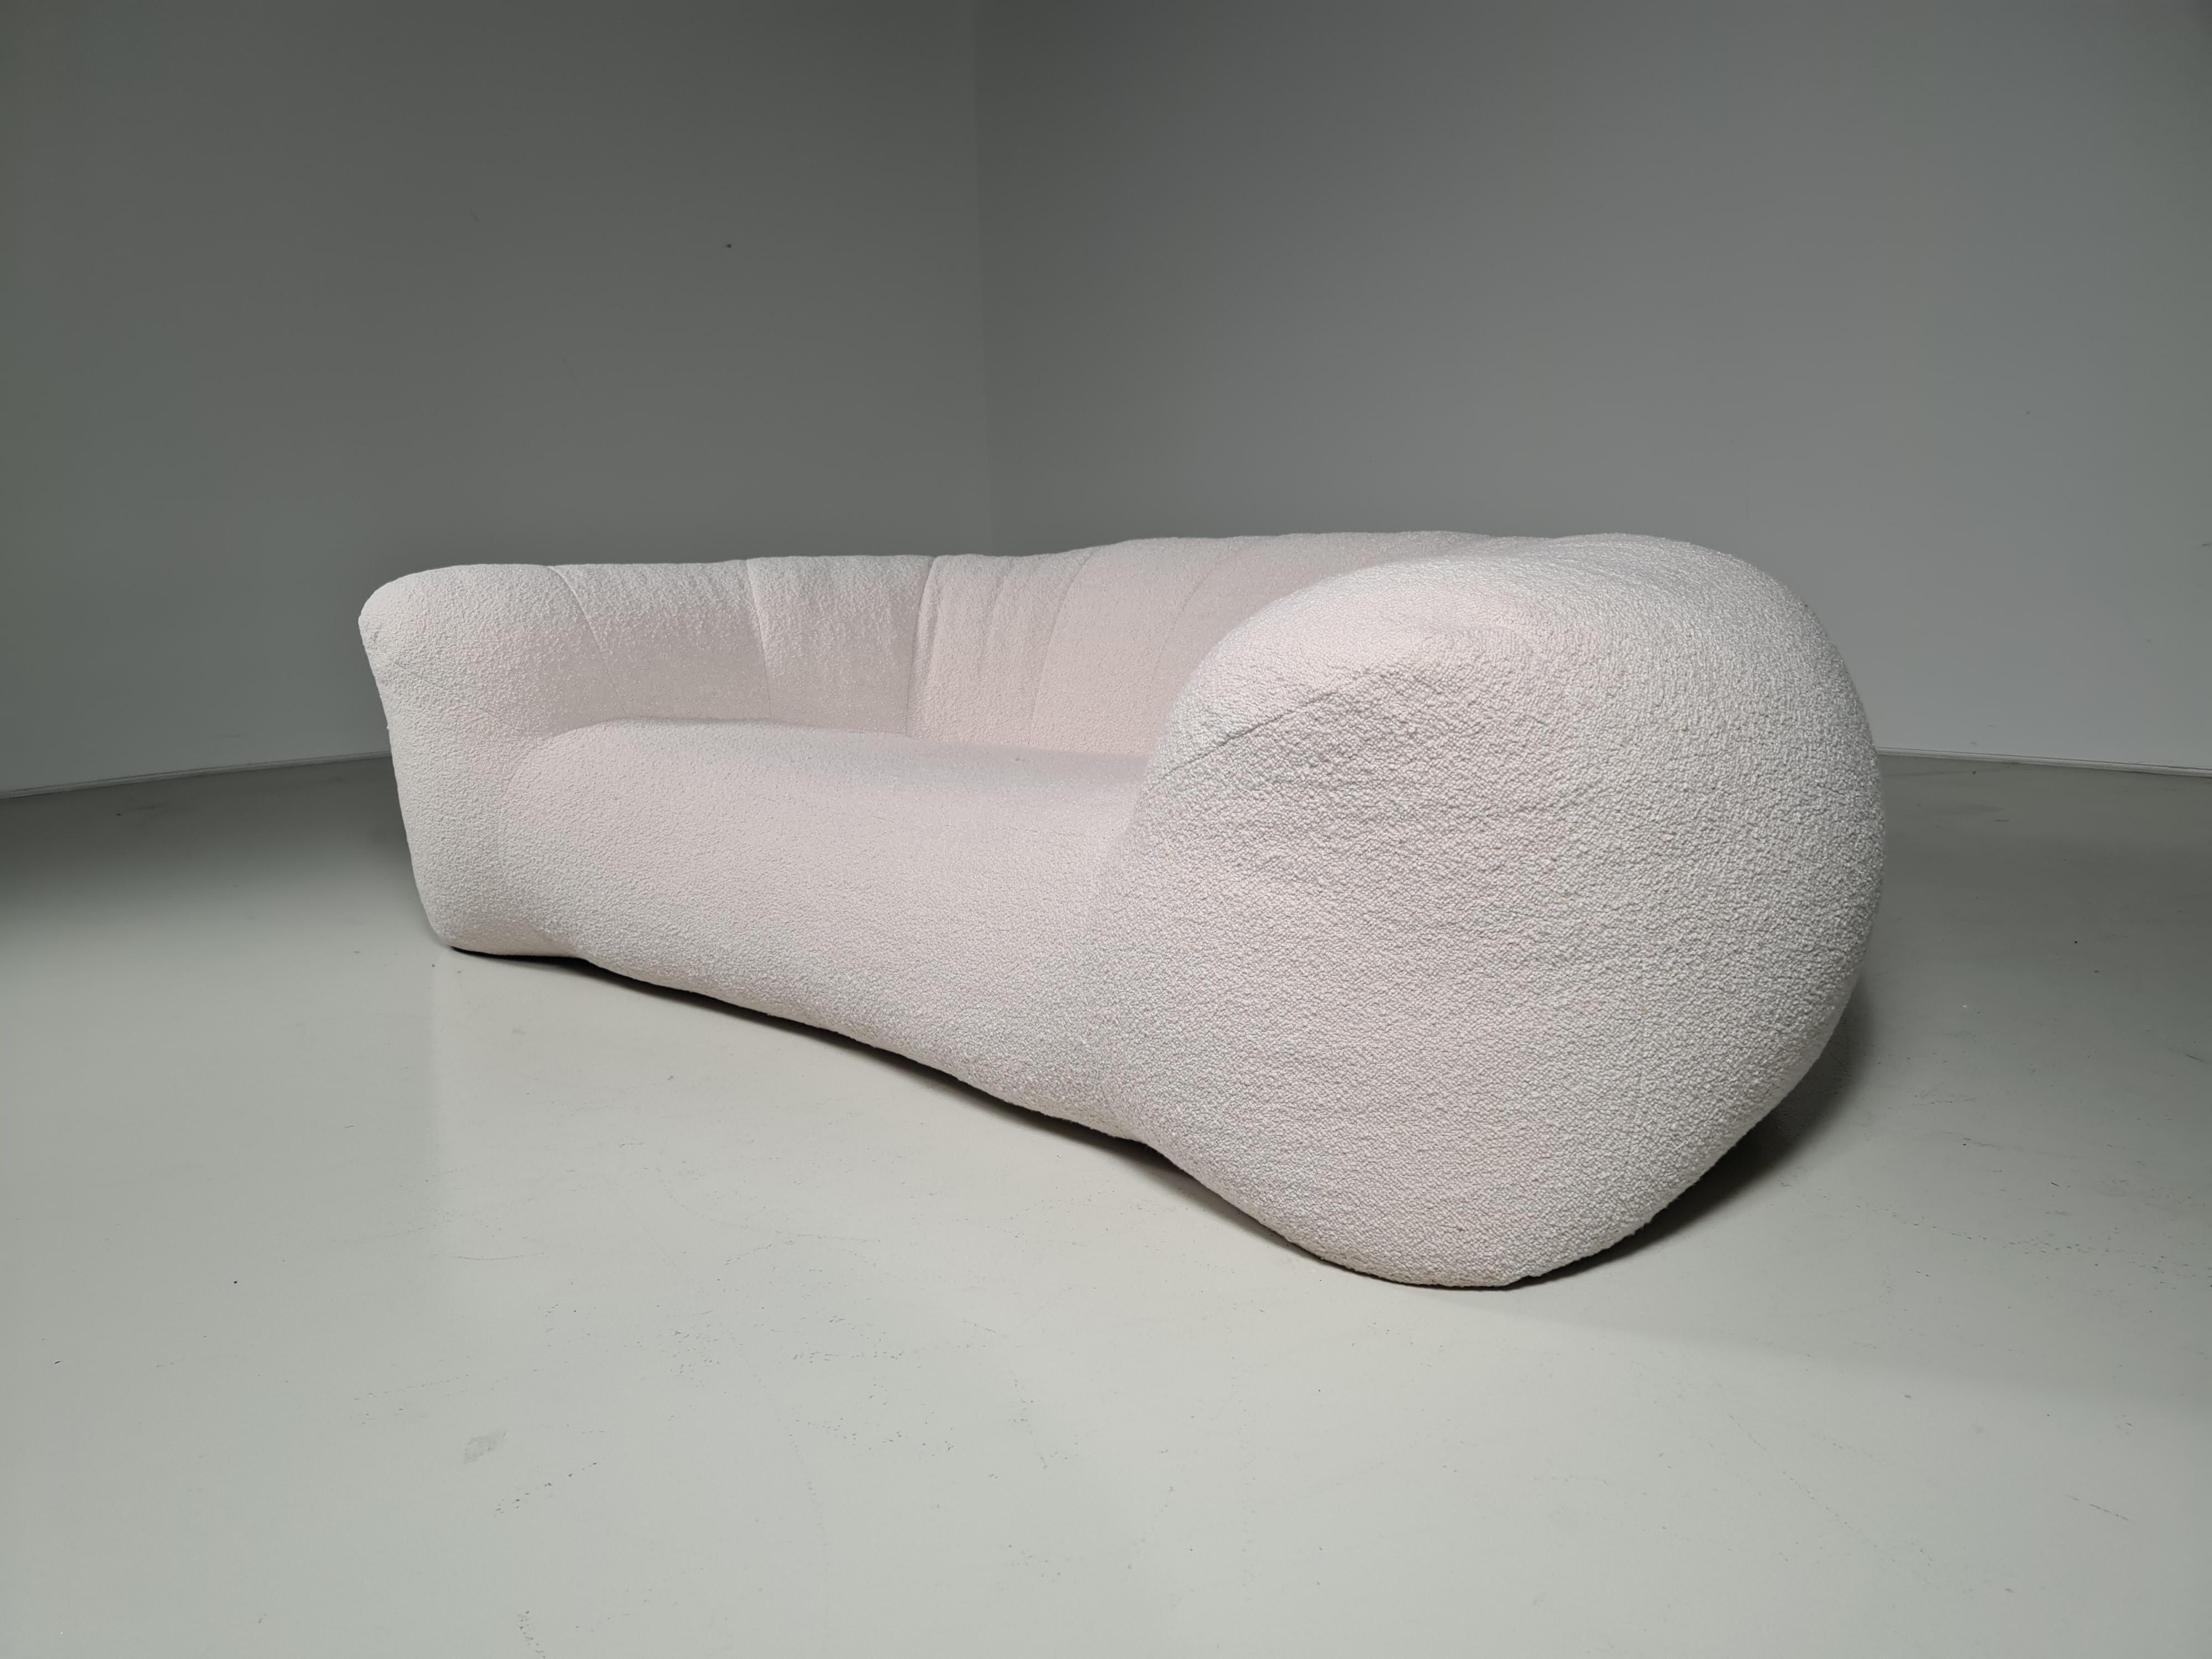 Lounge sofa designed by Raphaël Raffel for Maison Honoré Paris in France. 

This sofa was produced on demand in the 1970s until the mid-1980s. Because of this, it is very rare. The organic form is reminiscent of a croissant. Reupholstered in a